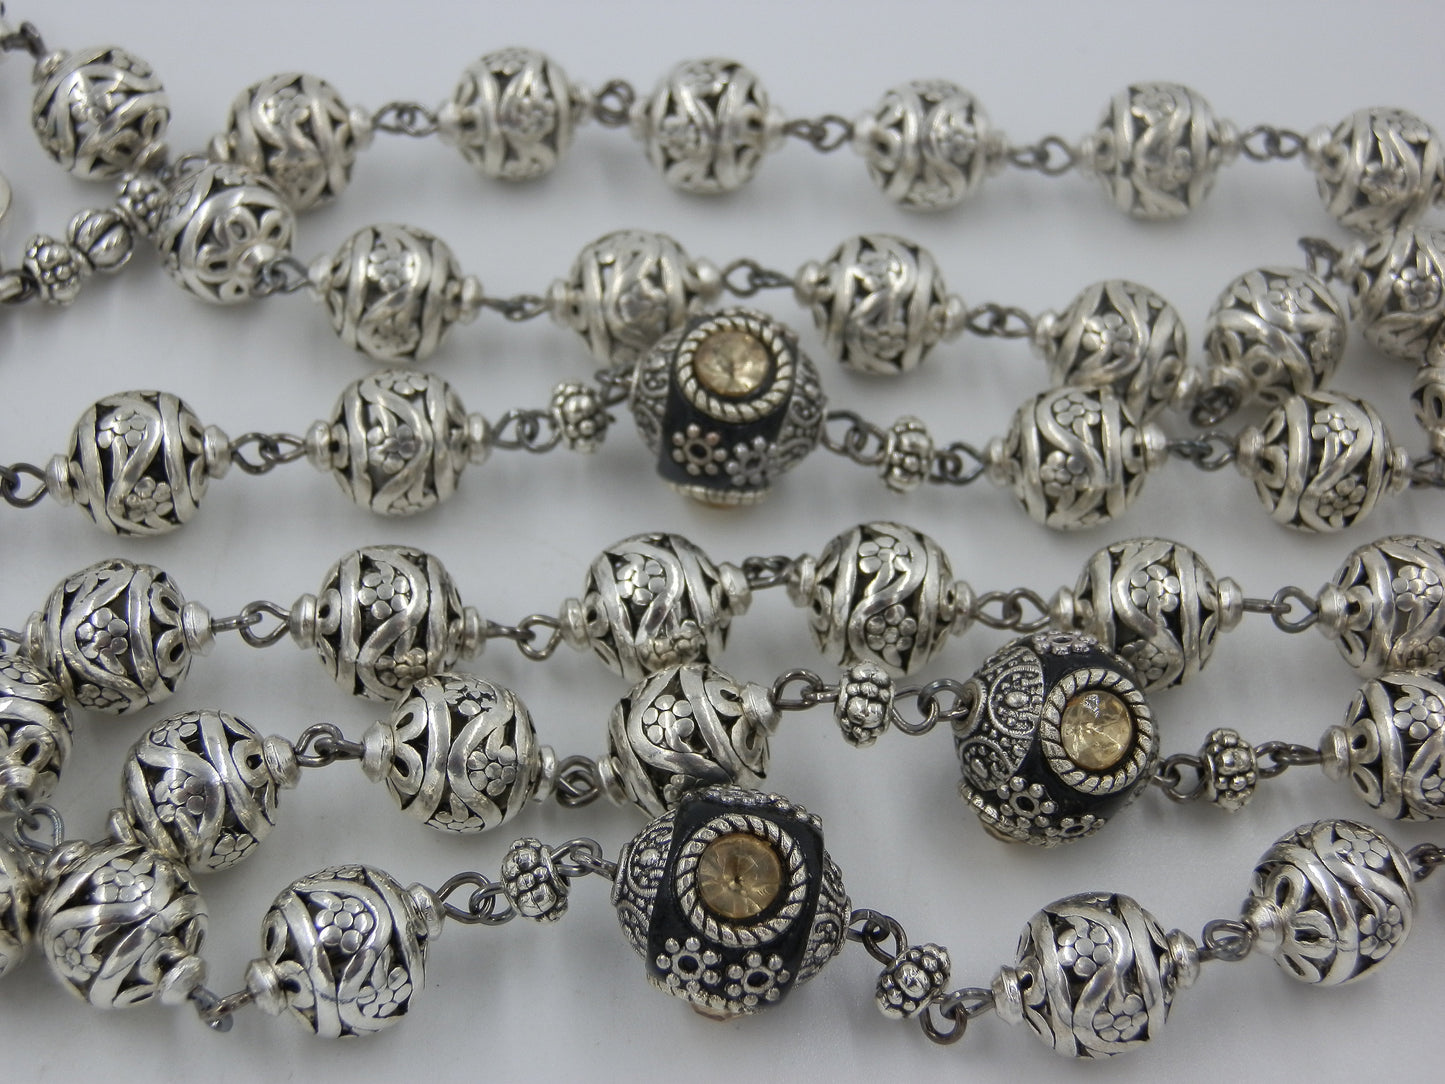 Handcrafted Ex Large Lourdes Tibetan silver Rosary, Saint Bernadette Rosary, Spiritual Rosary beads, The Immaculate Conception Rosary.